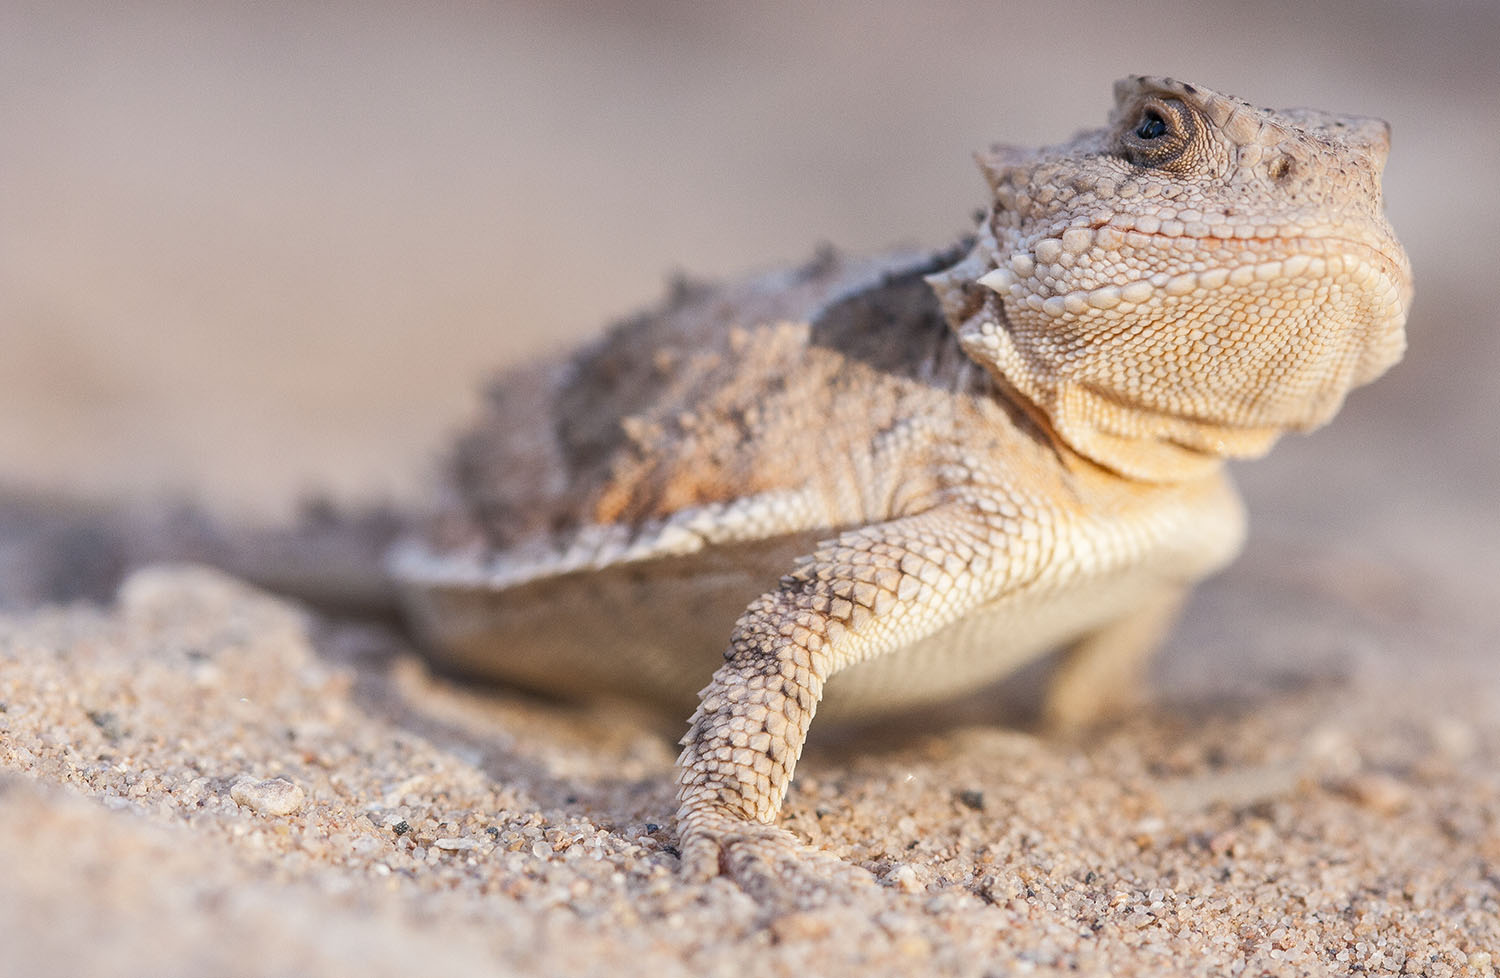 How Big Are Horned Lizards